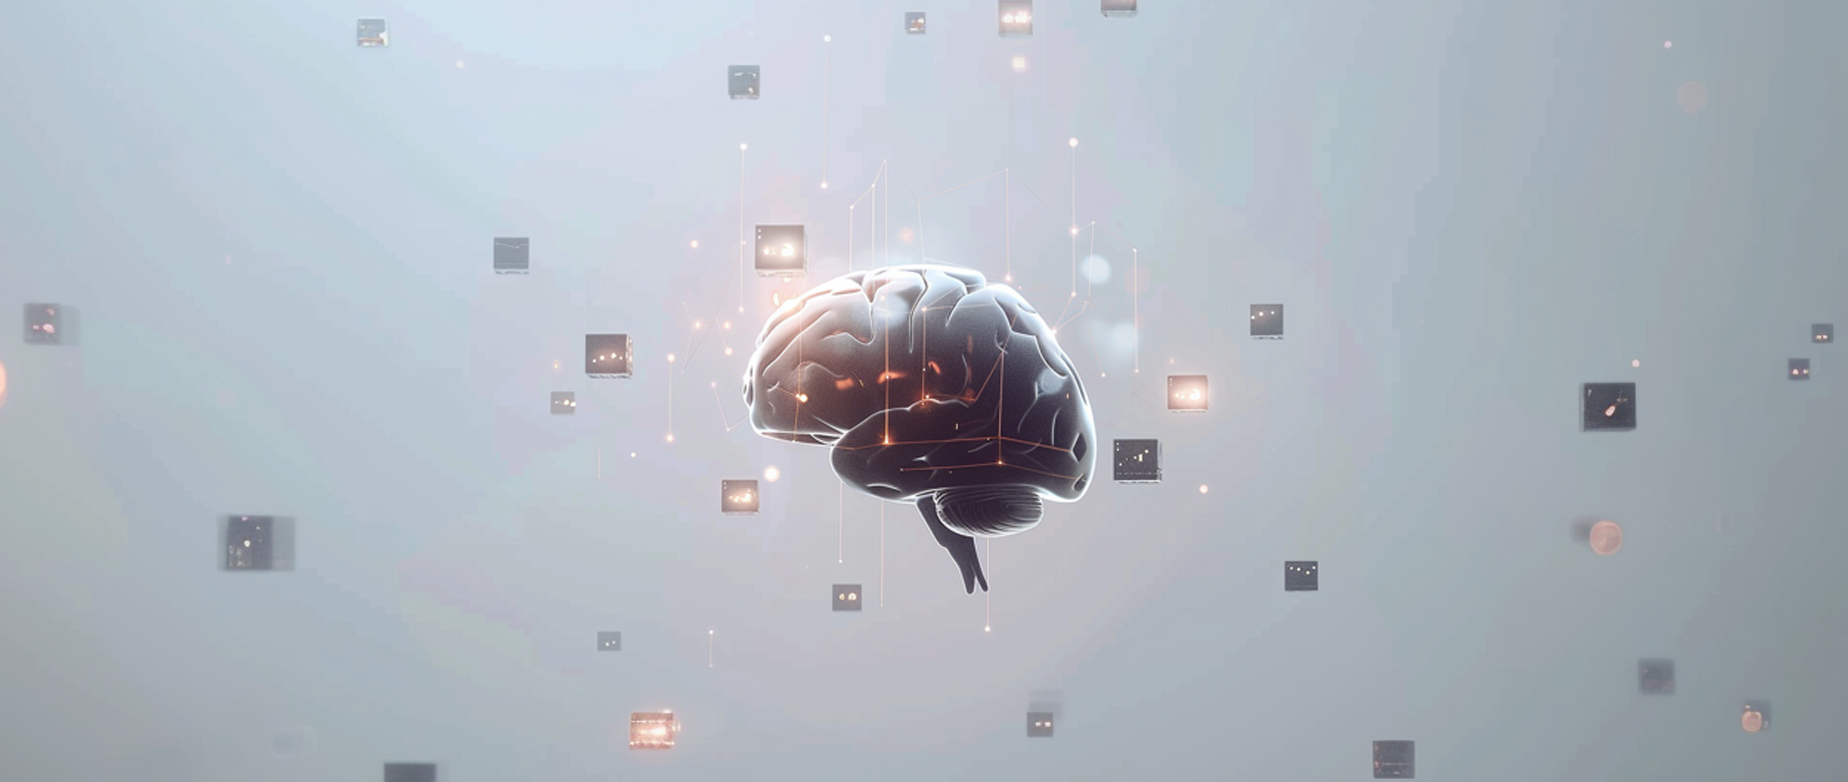 A brain suspended with technology lines and shapes surrounding it on a grey background.